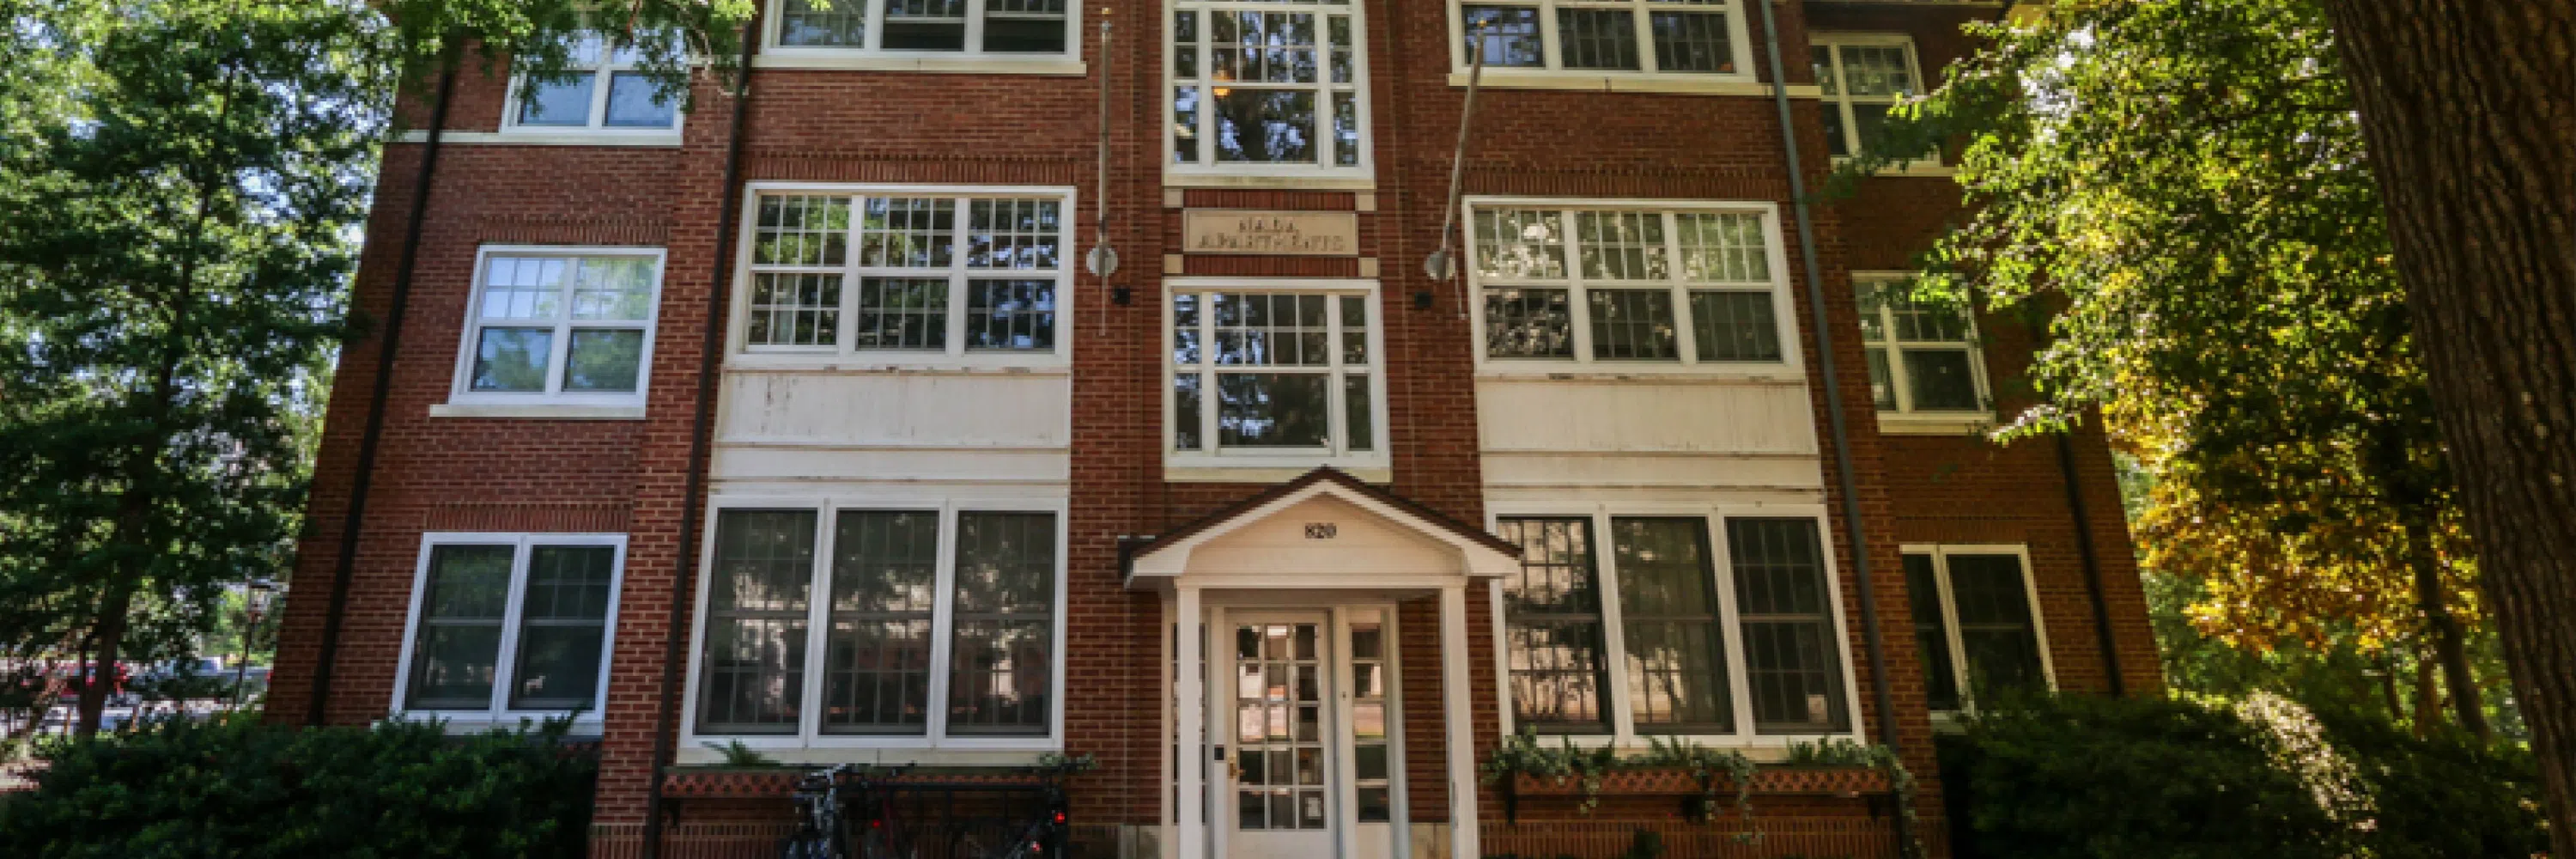 View of the front of 820 Henderson Street during the day